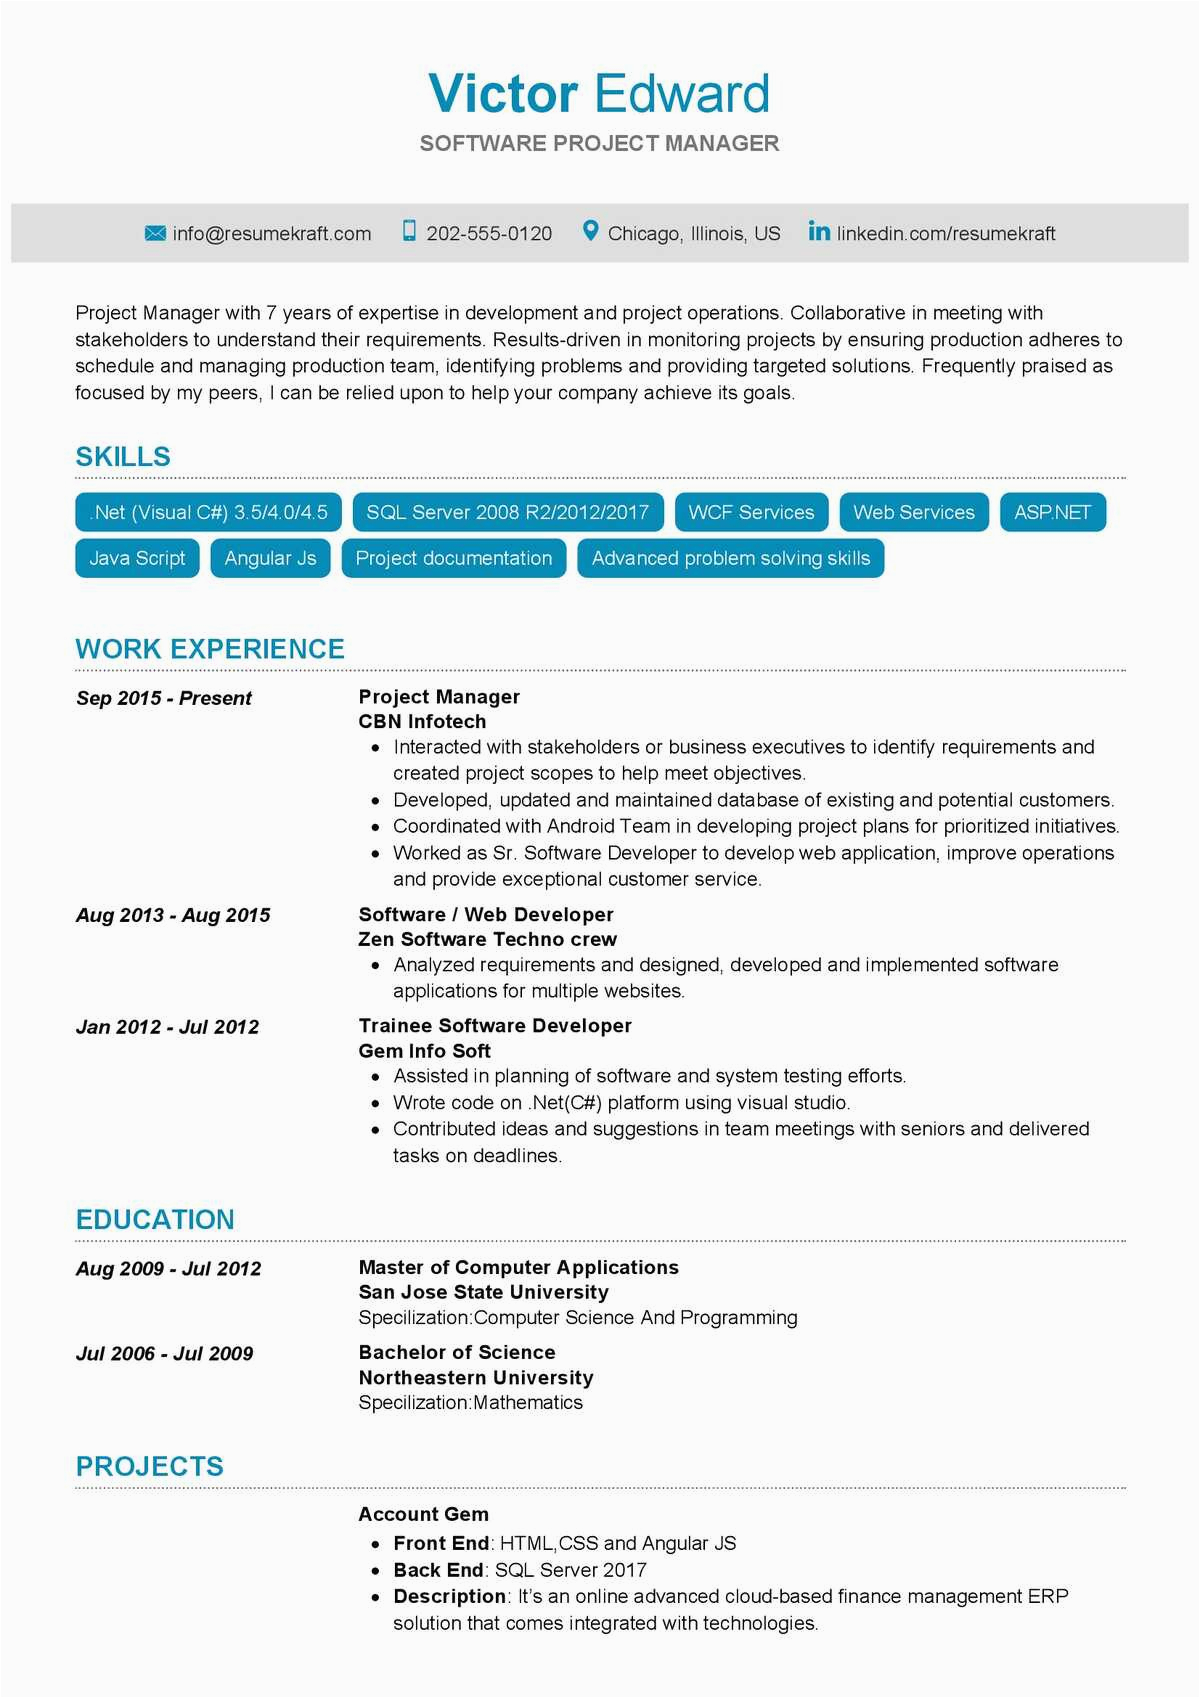 Sample Resume for Project Manager It software software Project Manager Resume Sample 2021